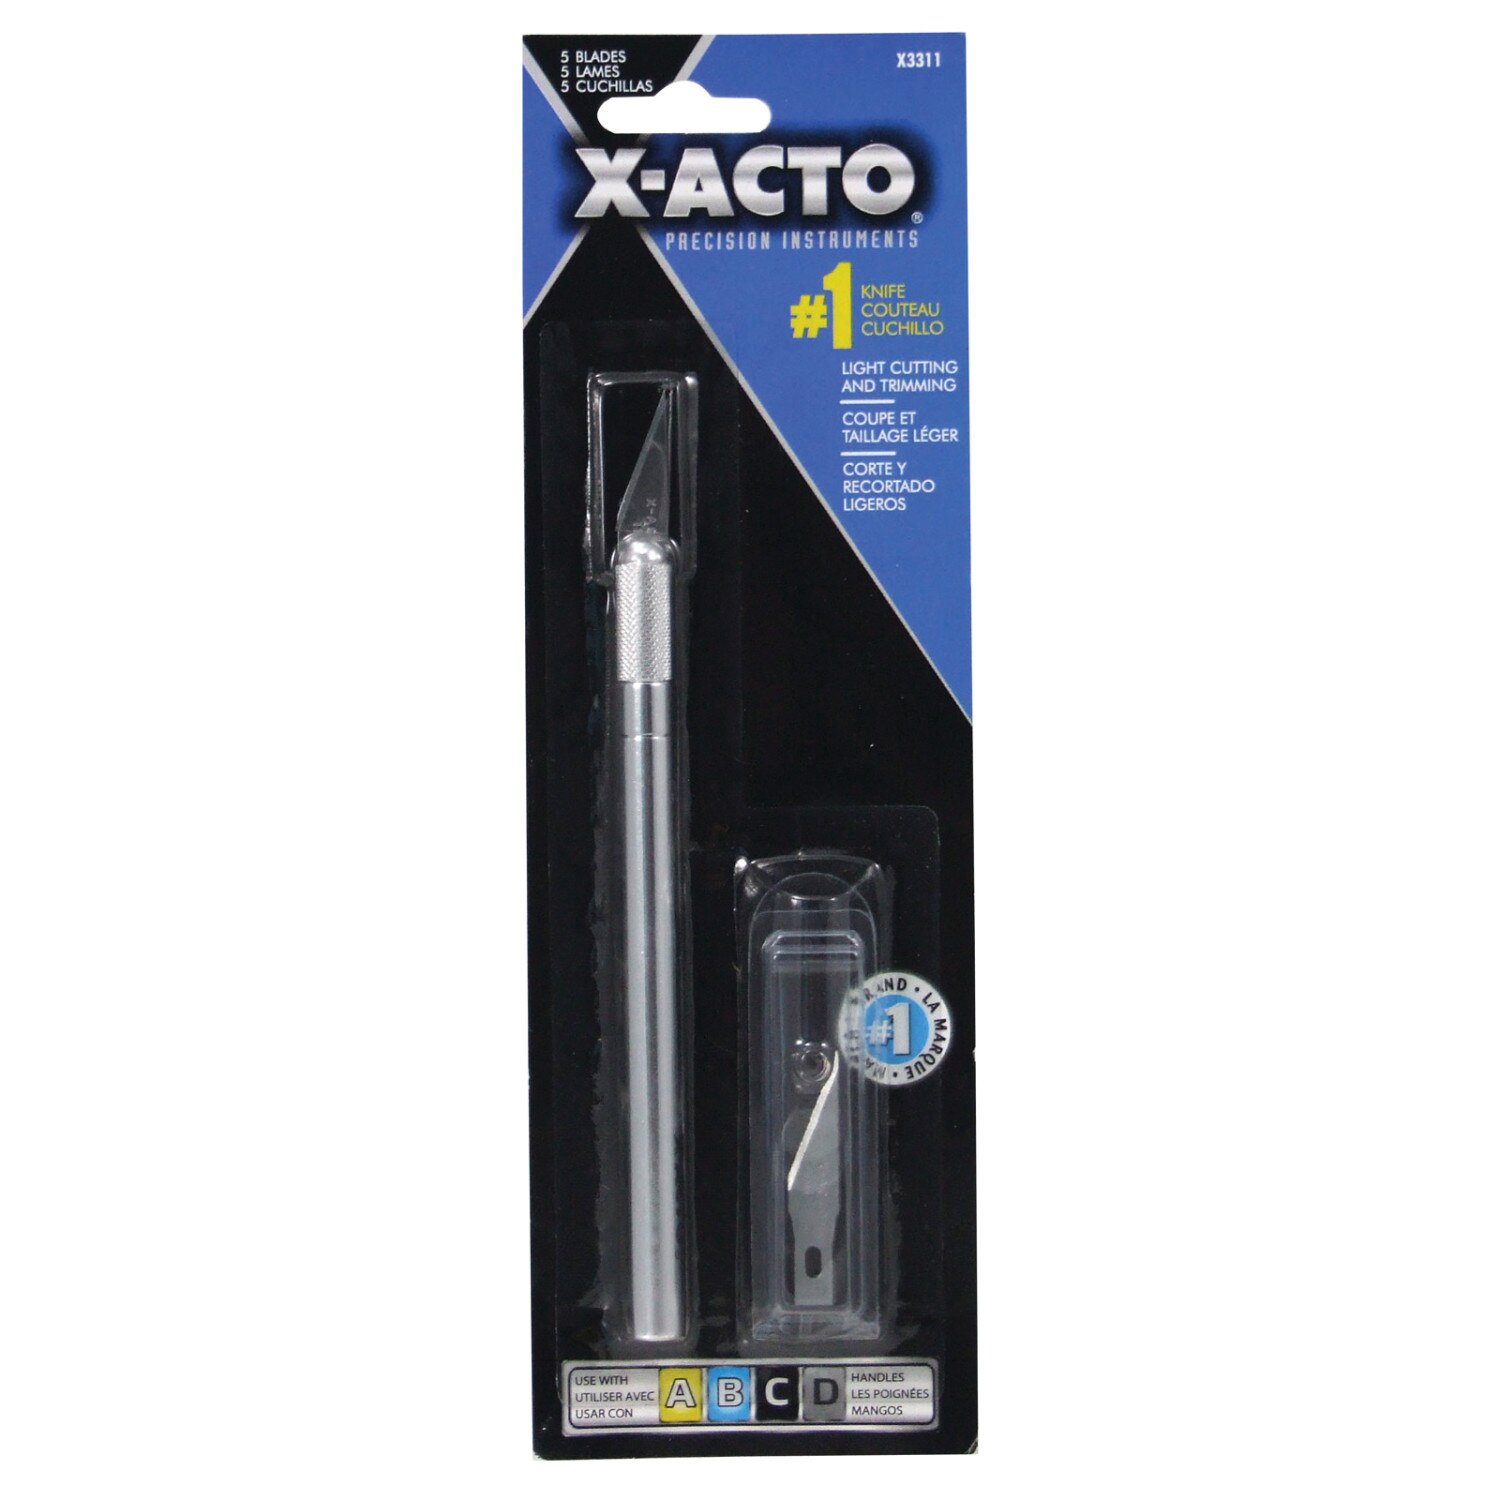 X-Acto #1 Knife Set with 5 #11 Blades